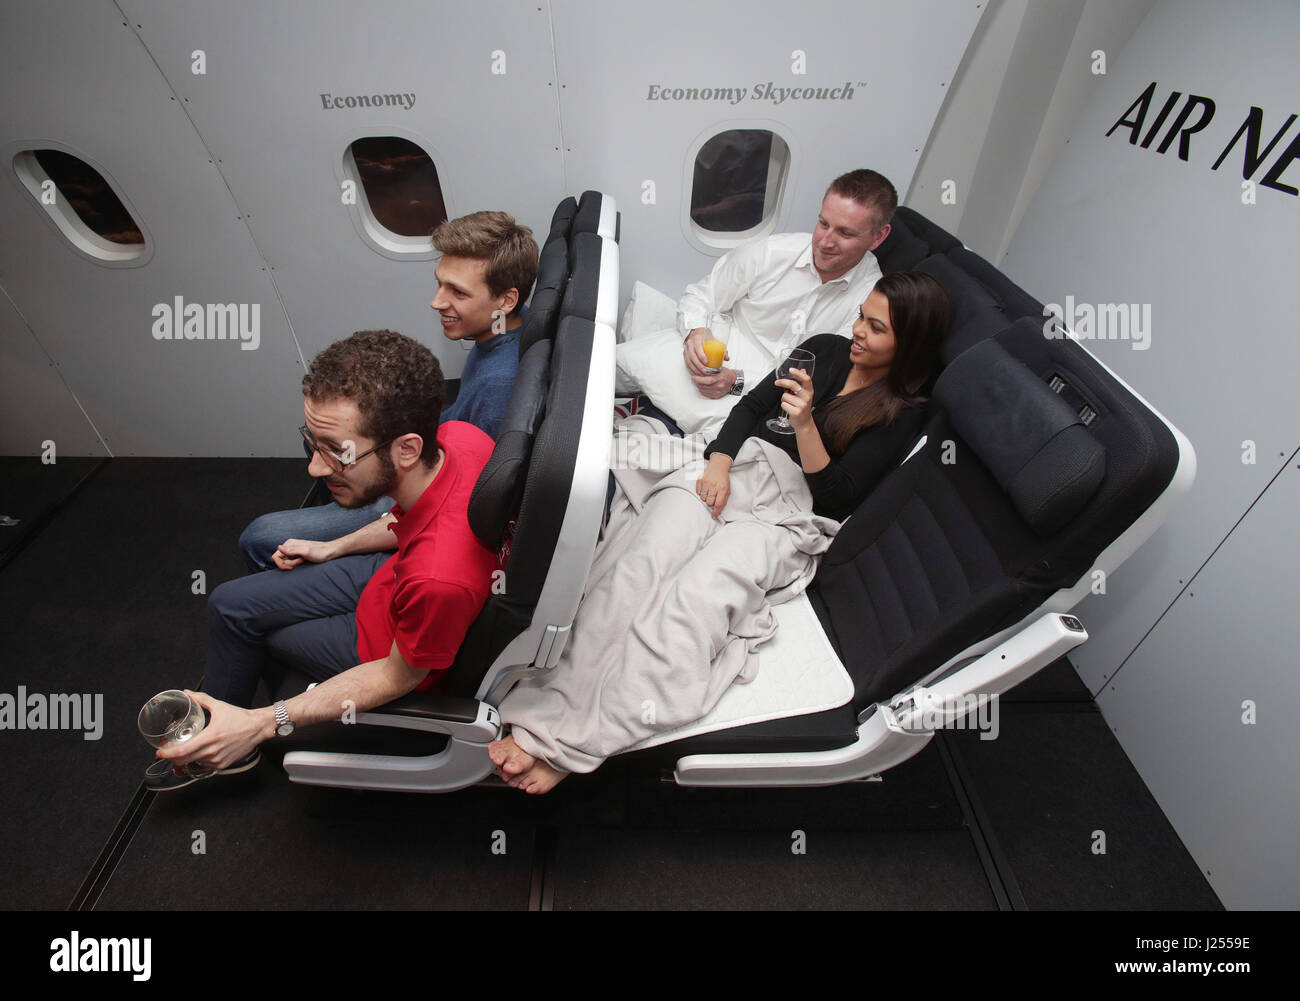 Air New Zealand staff Chris Allison and Nishi Prasad (right) demonstrate the Economy Skycouch flexible seating in a mock-up aircraft cabin, during the launch of Air New Zealand's pop-up event 'This is How We Fly', which showcases the airline's on-board facilities, in Soho, London. Stock Photo